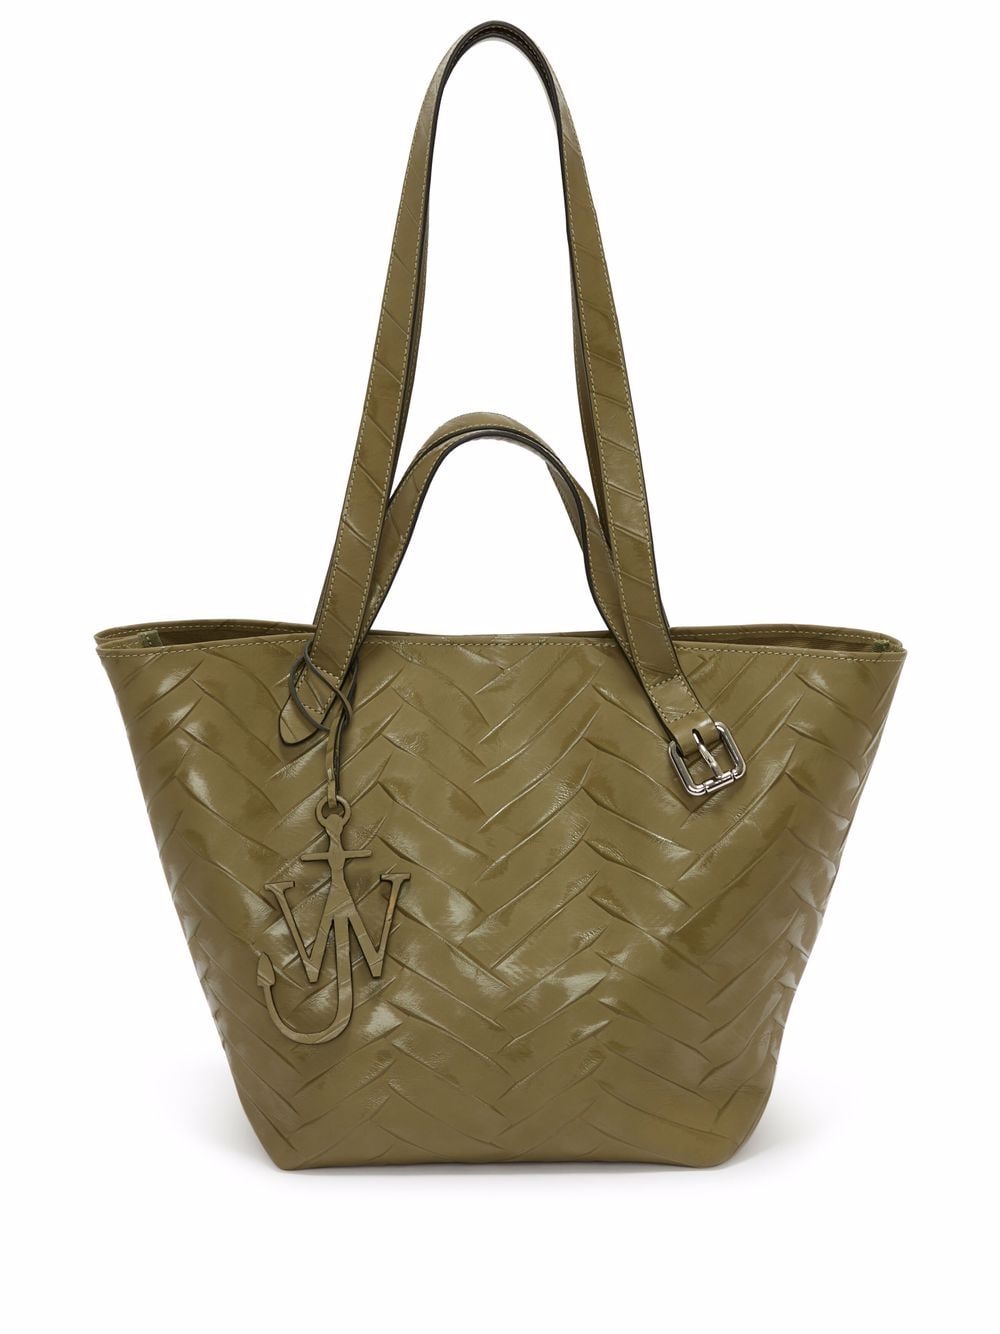 JW Anderson double handle belt tote bag - Green